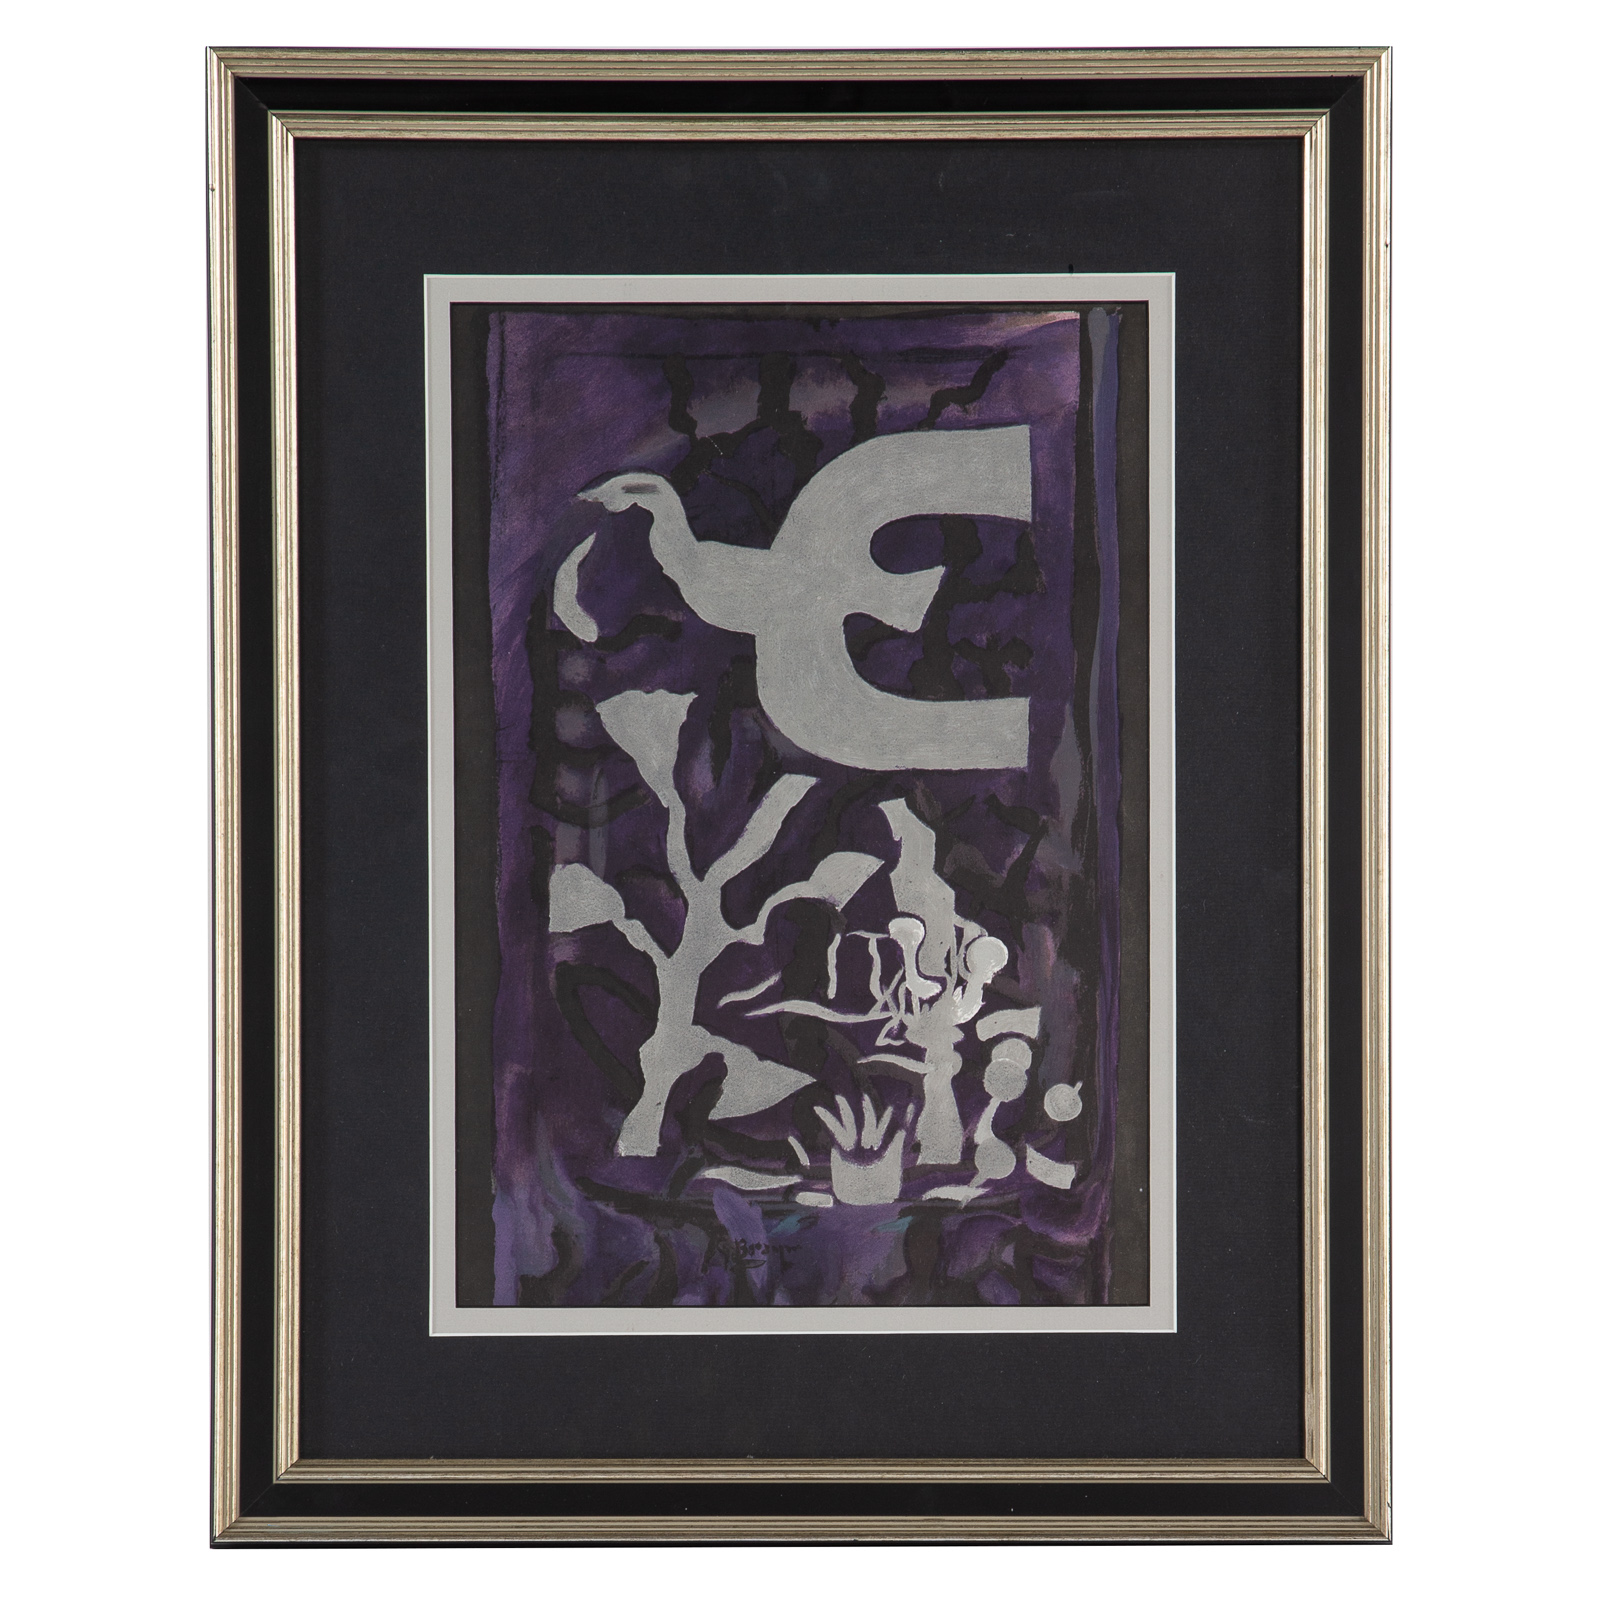 GEORGES BRAQUE UNTITLED LITHOGRAPH 36a5f2